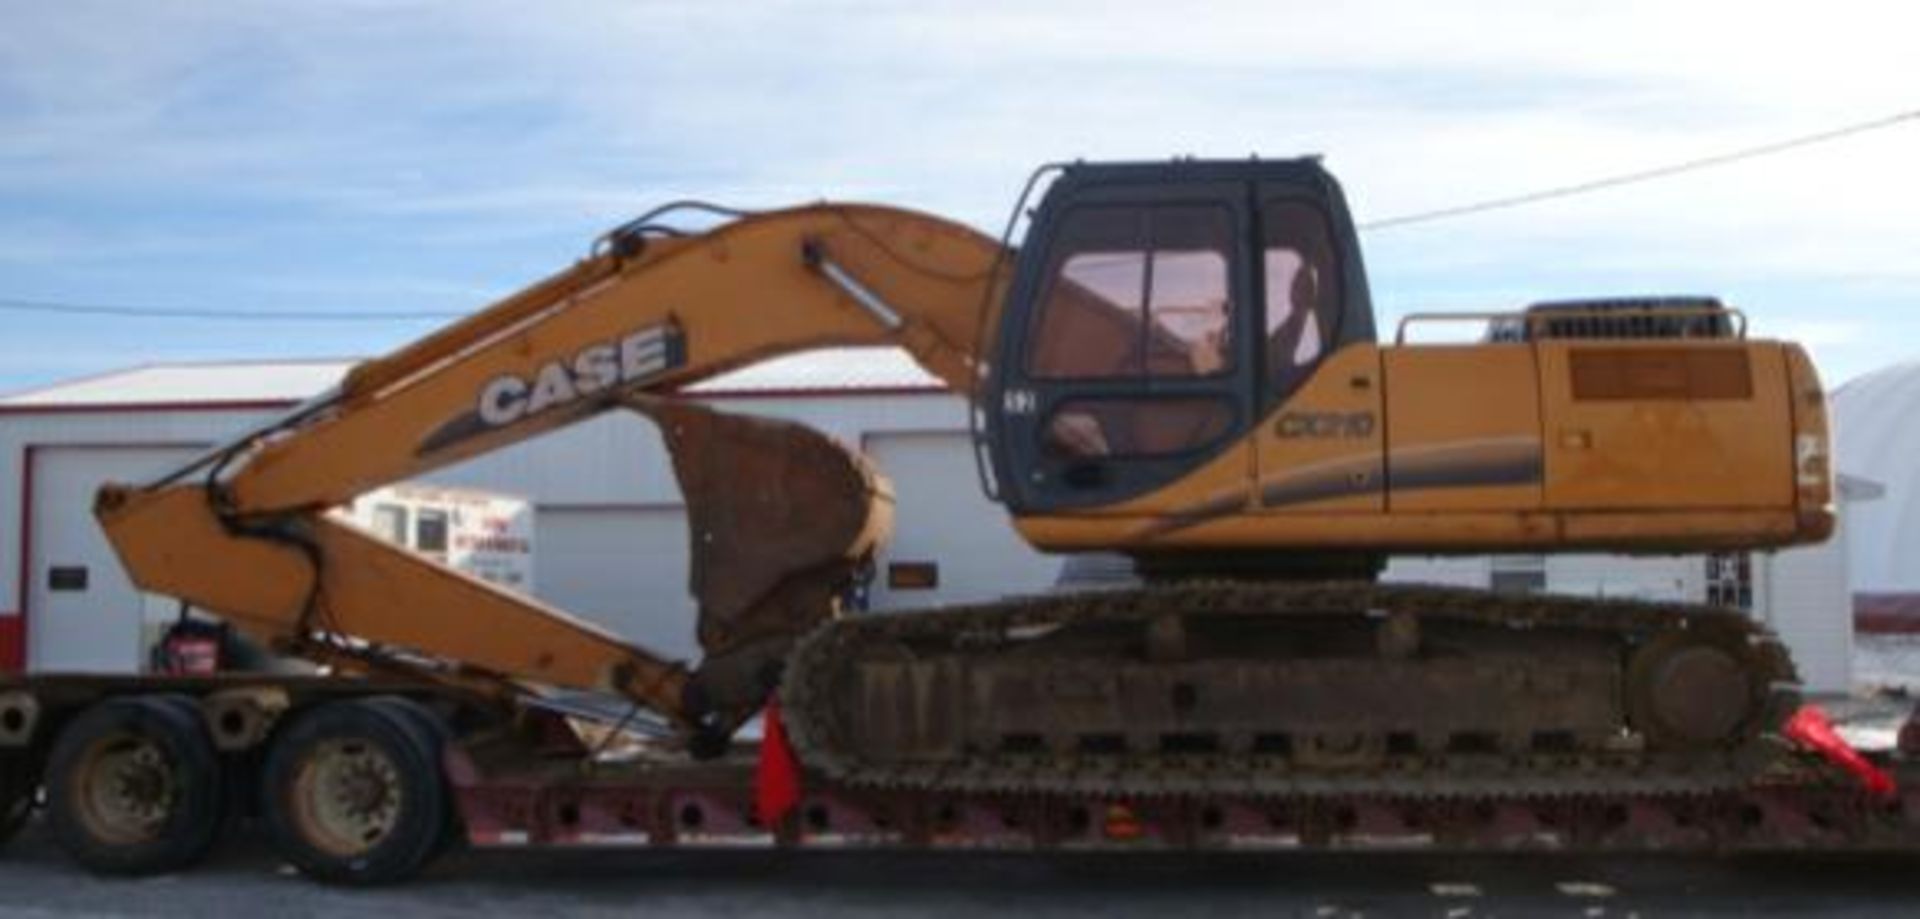 Lot 197a - (Lot 197a) 2005 Case excavator model CX210, serial DAC212536 6,900 hours - Image 2 of 2